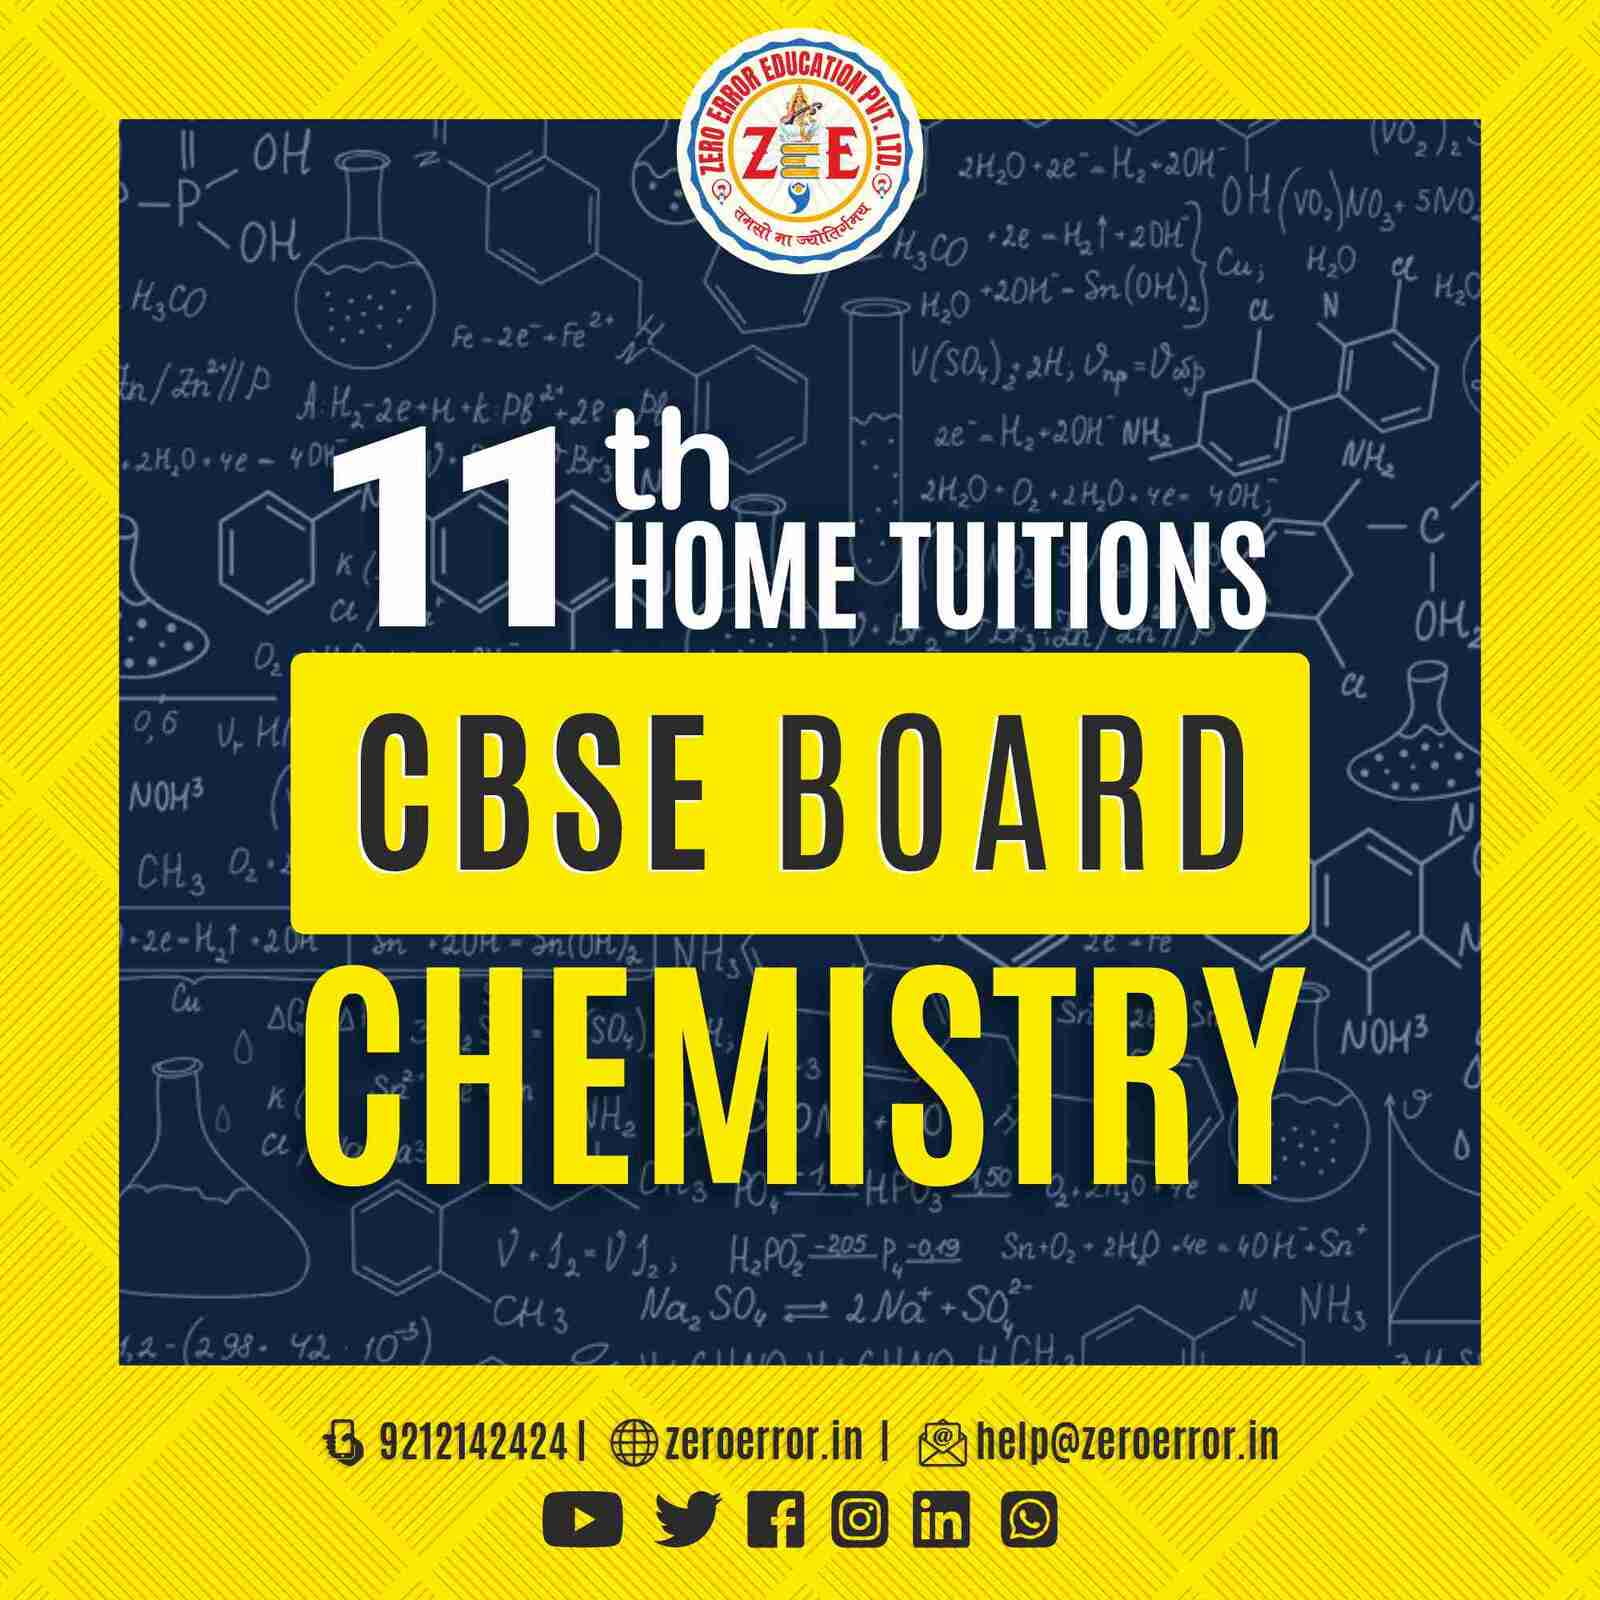 11th Grade CBSE Chemistry Online Classes by Zero Error Education Prepare for your CBSE board exams with online and offline Chemistry classes for 11th grade. Learn from experienced home tutors and get all the help you need to succeed. Enroll today at Zero Error Education. [https://zeroerror.in/] Call 9212142424 for more information.